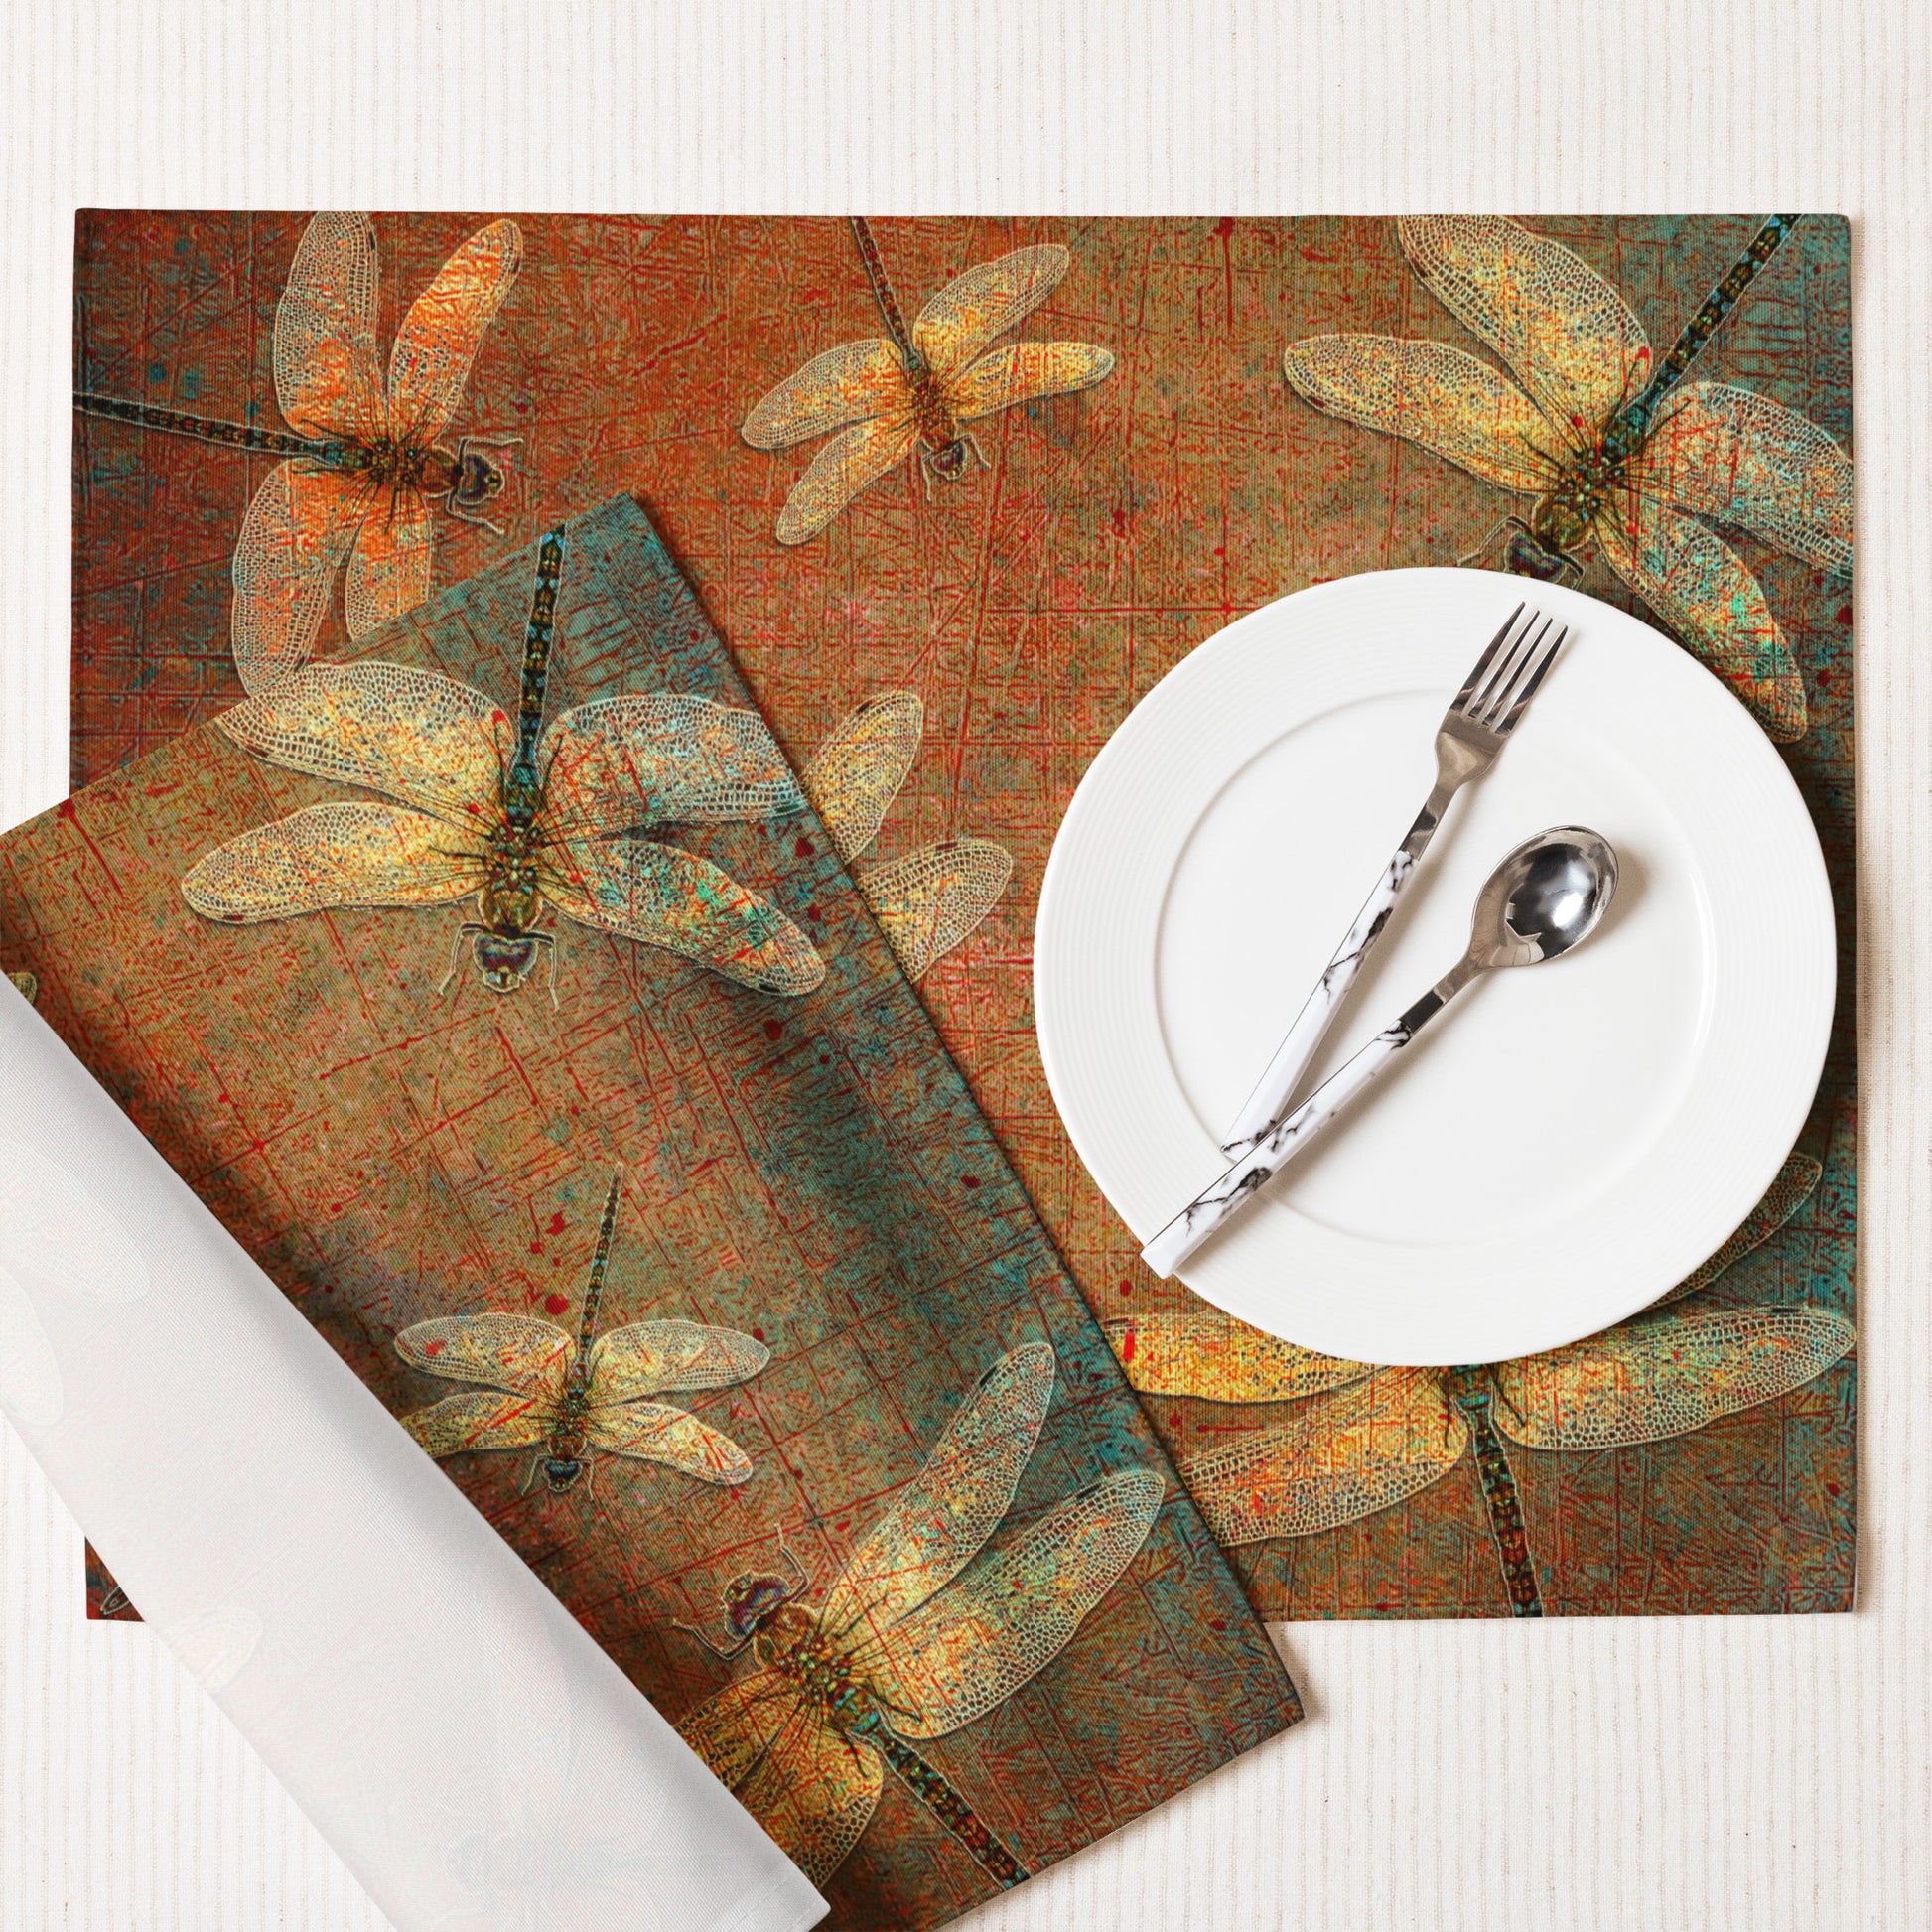 Golden Dragonflies on Orange and Green Background Print Placemat Set of 4 with plate